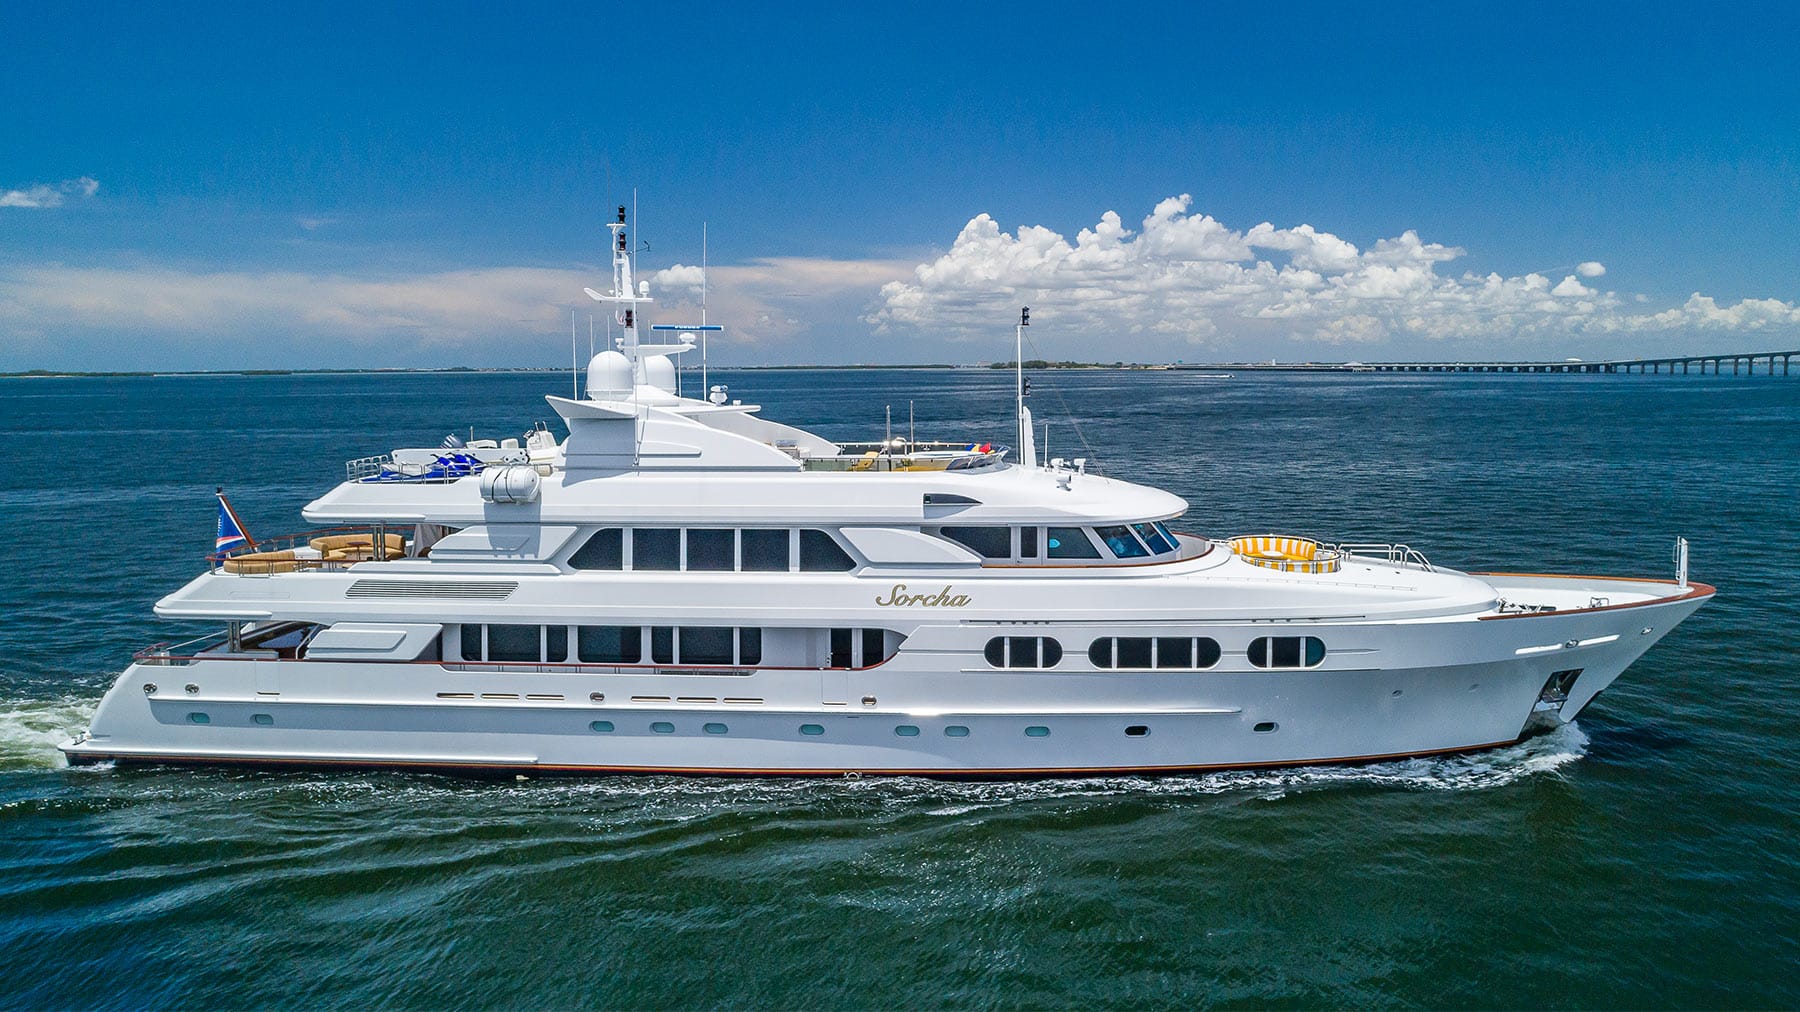 Northern Marine Luxury Yacht Sorcha Available For Sale